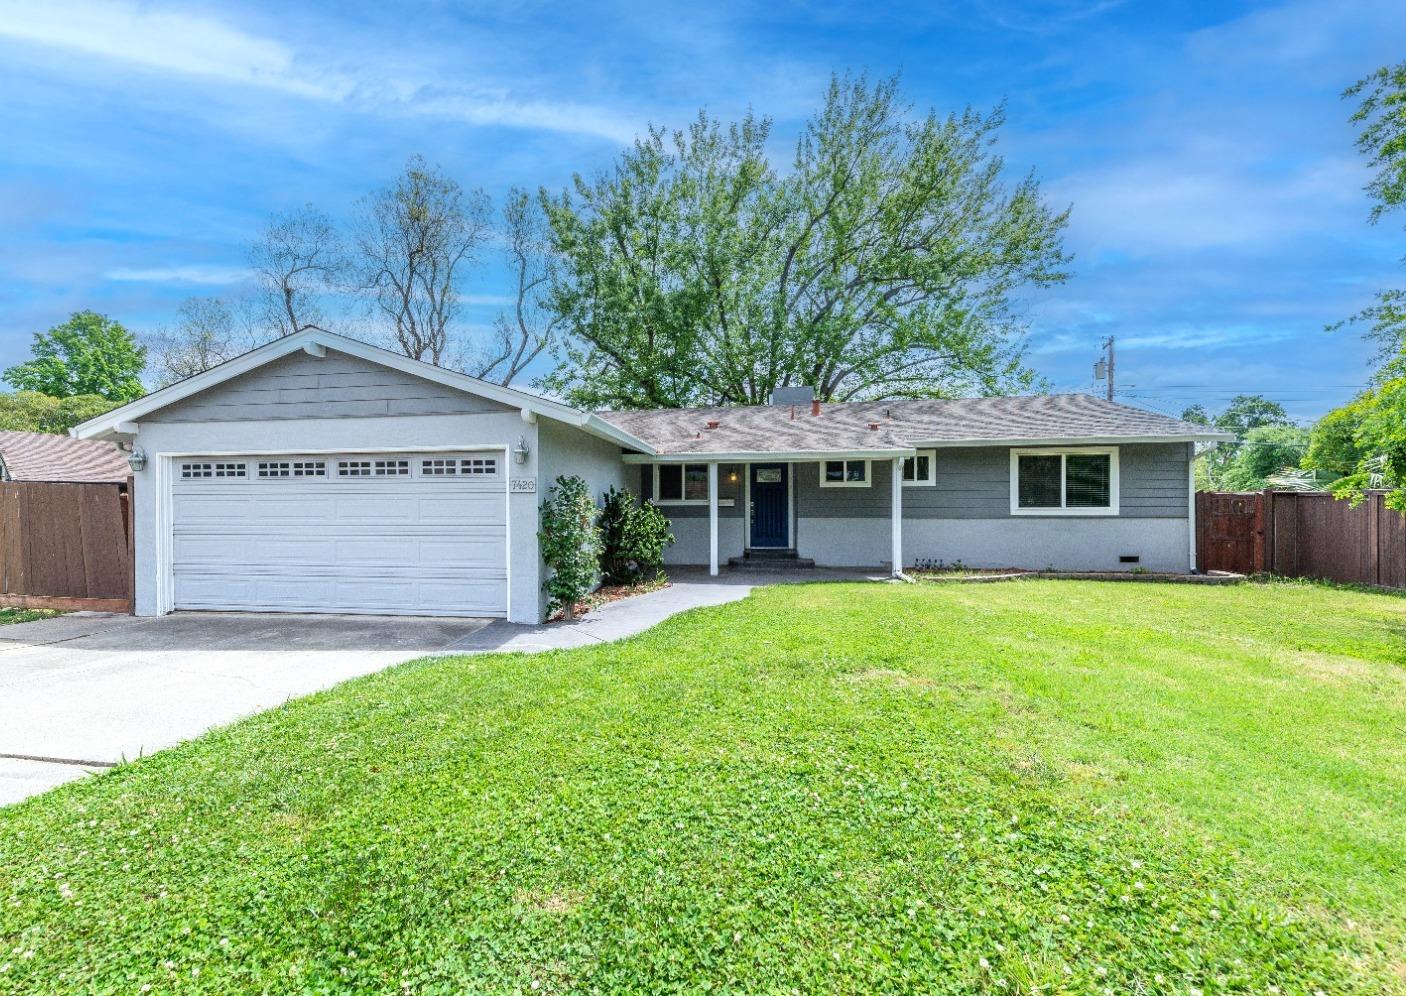 Photo of 7420 Westgate Dr in Citrus Heights, CA